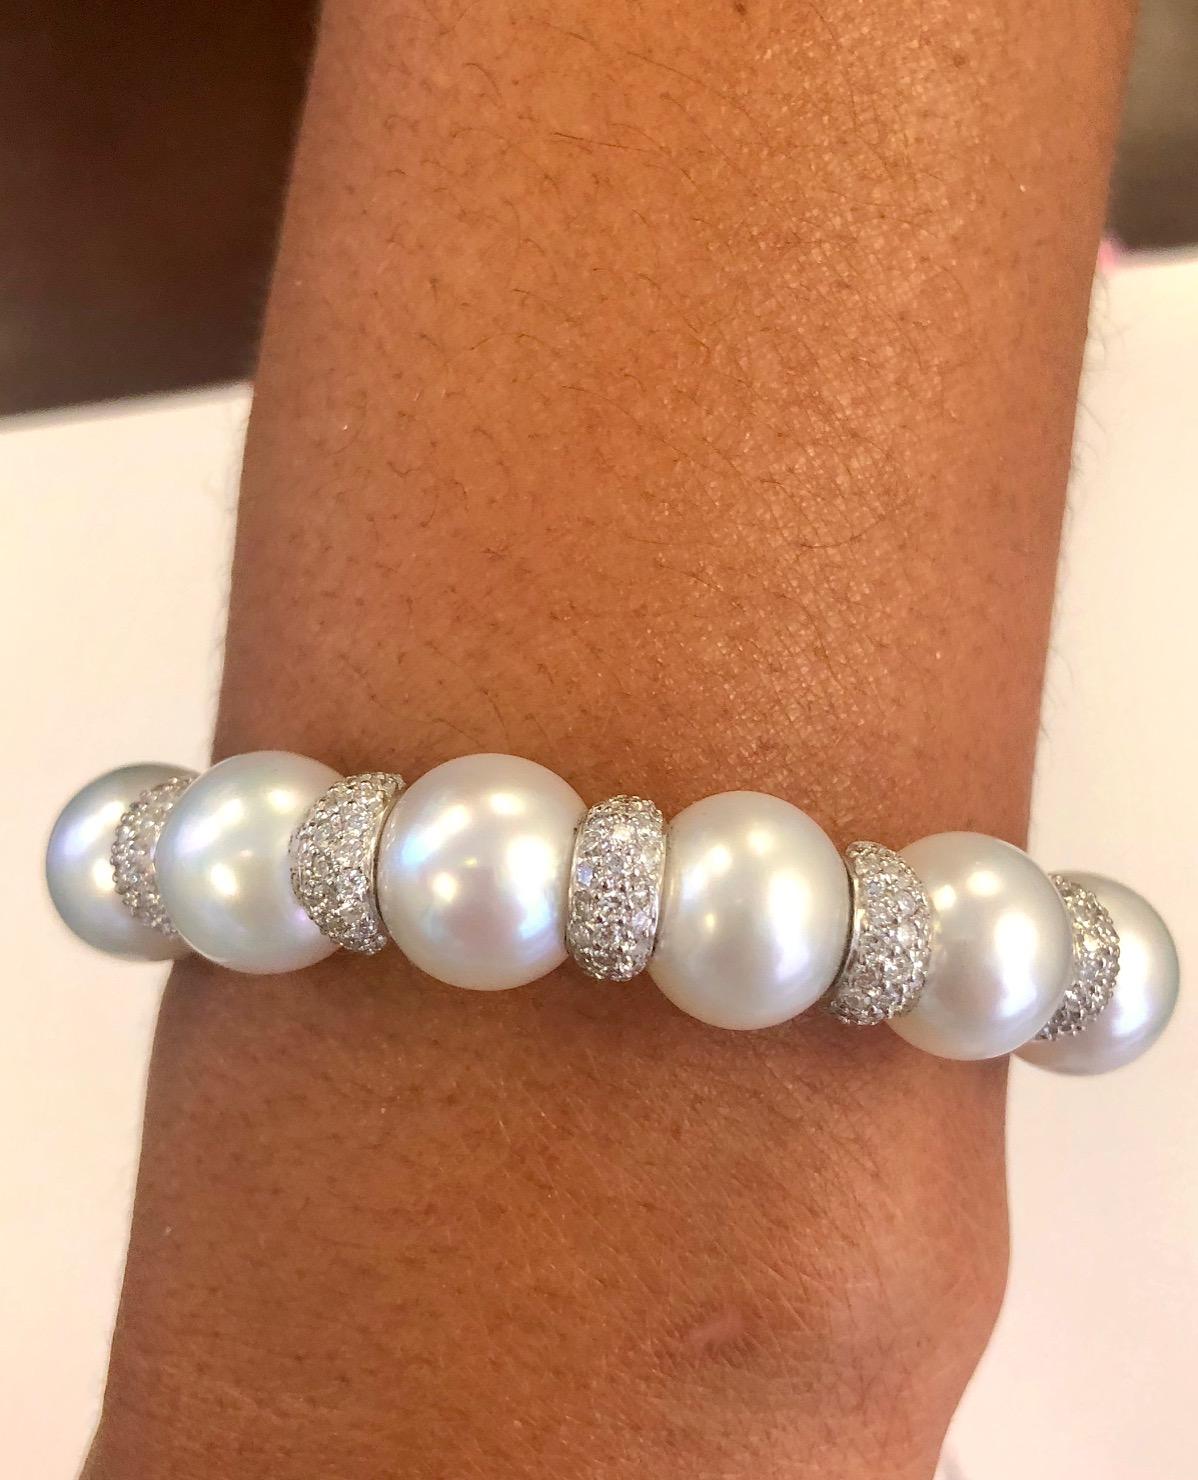 Our most popular spring-on bangle bracelet, made in 18 Kt White Gold, set with 196 Diamonds and Fine South Sea Pearls ranging from 13.0 to 10.50mm.  Also available with Tahitian Black Pearls or natural color Golden Pearls.
Many of our clients like